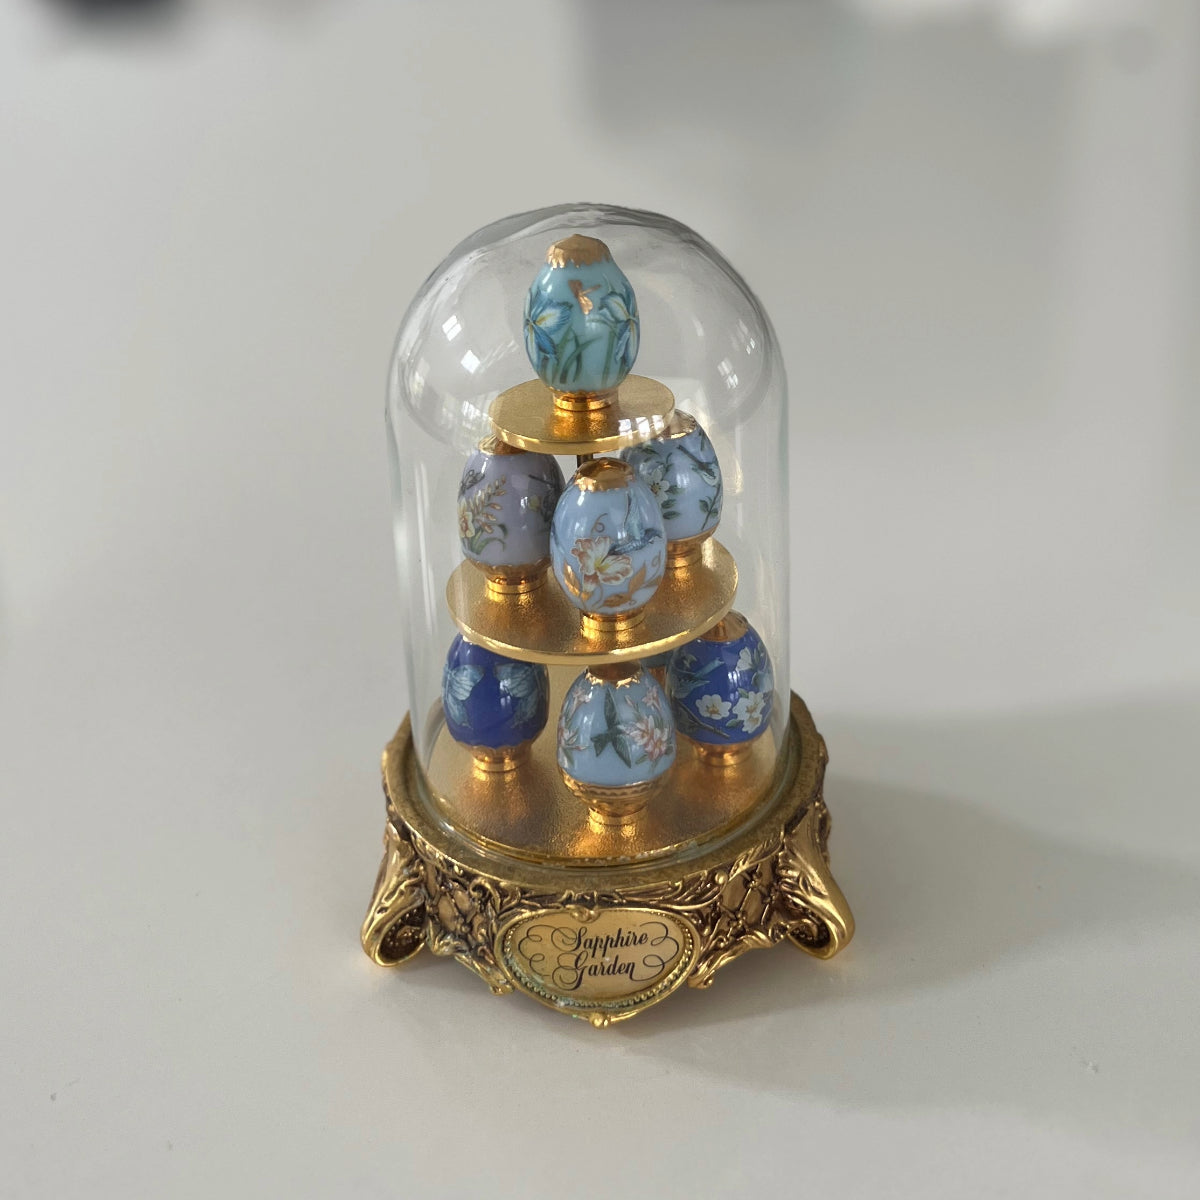 Vintage Franklin Mint House of Faberge Sapphire Garden With 8 Faberge Eggs.